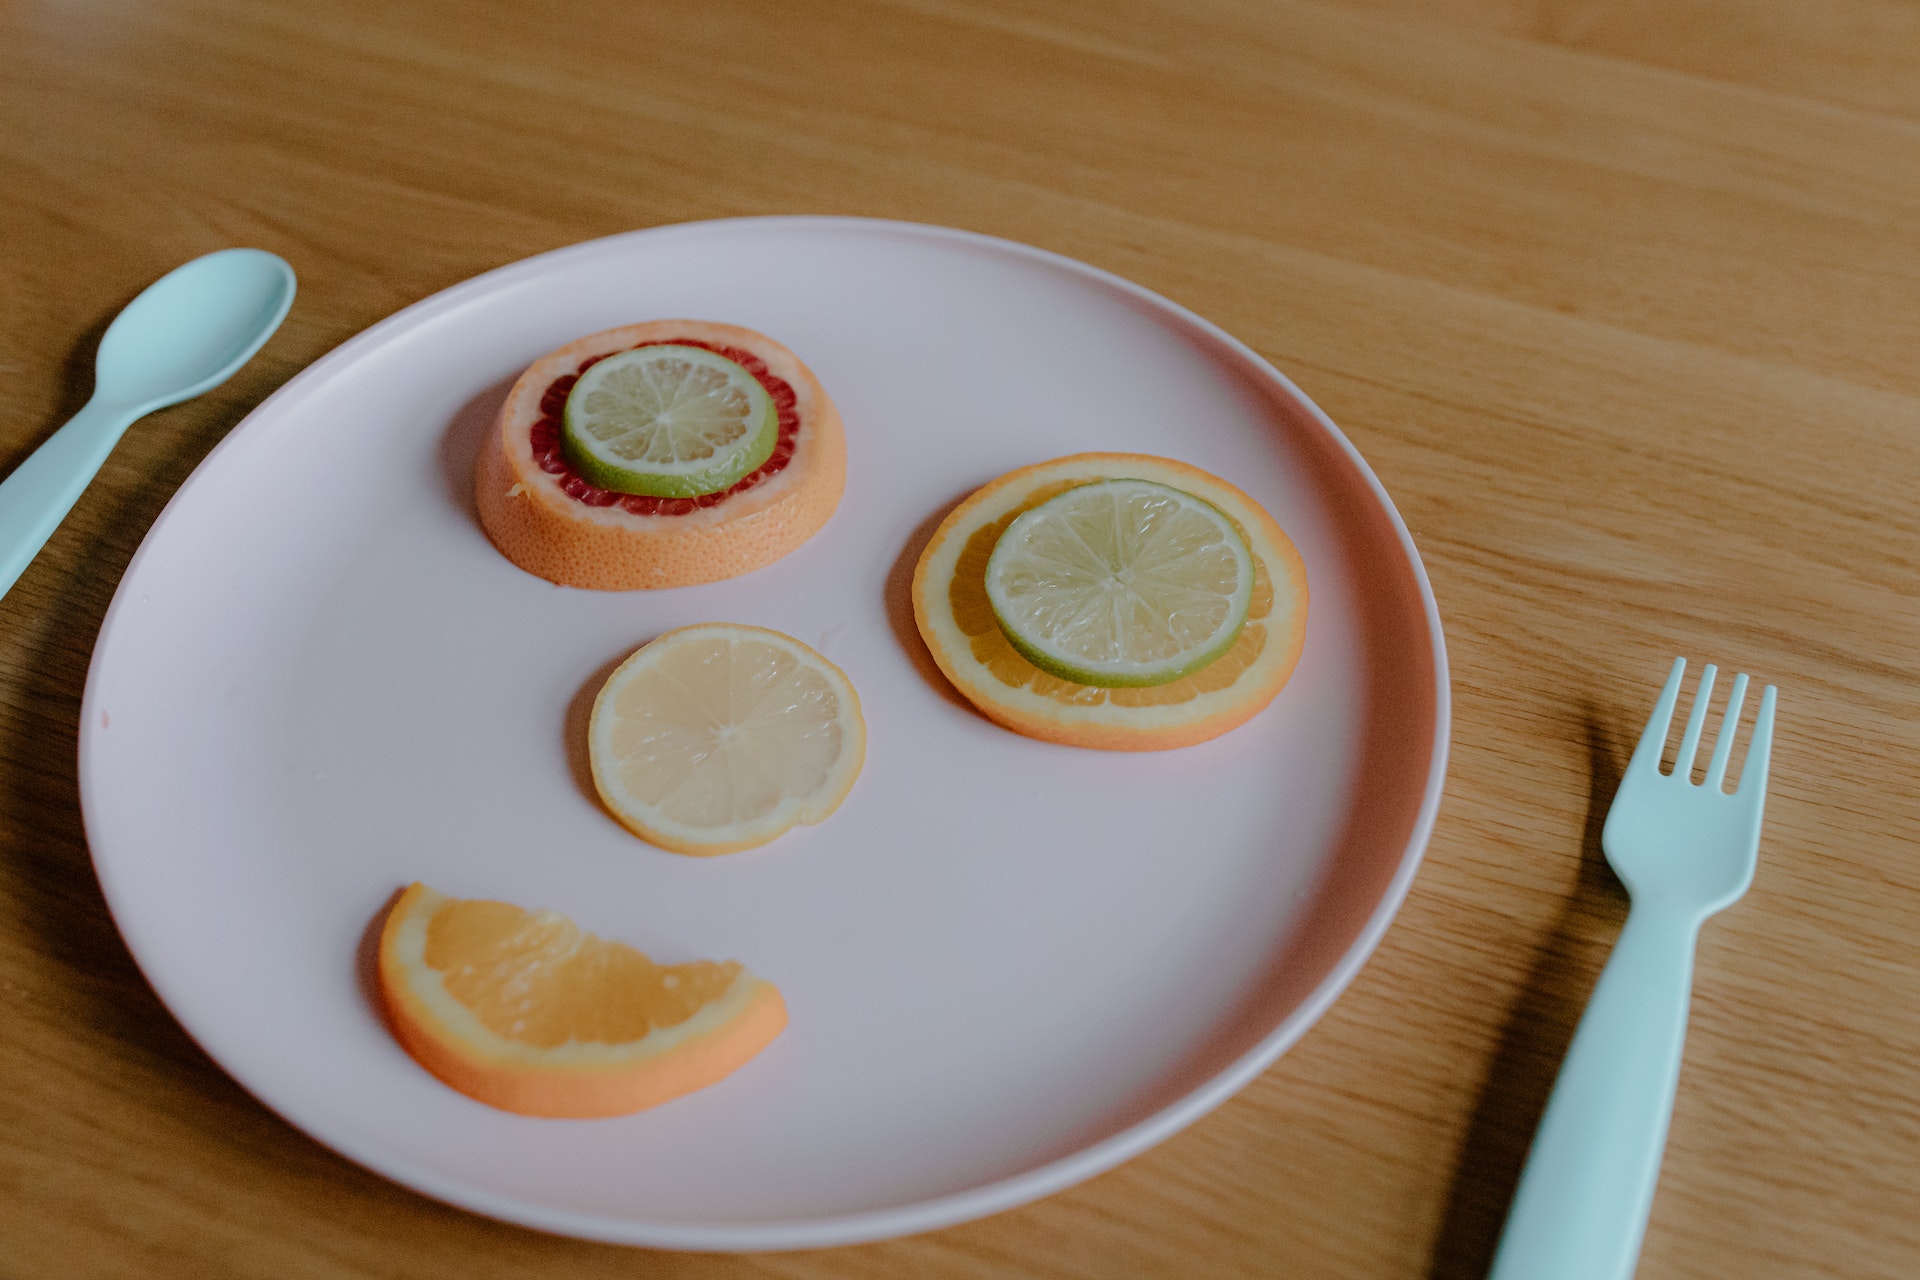 Incredible Fruit Faces That Will Blush with Pride